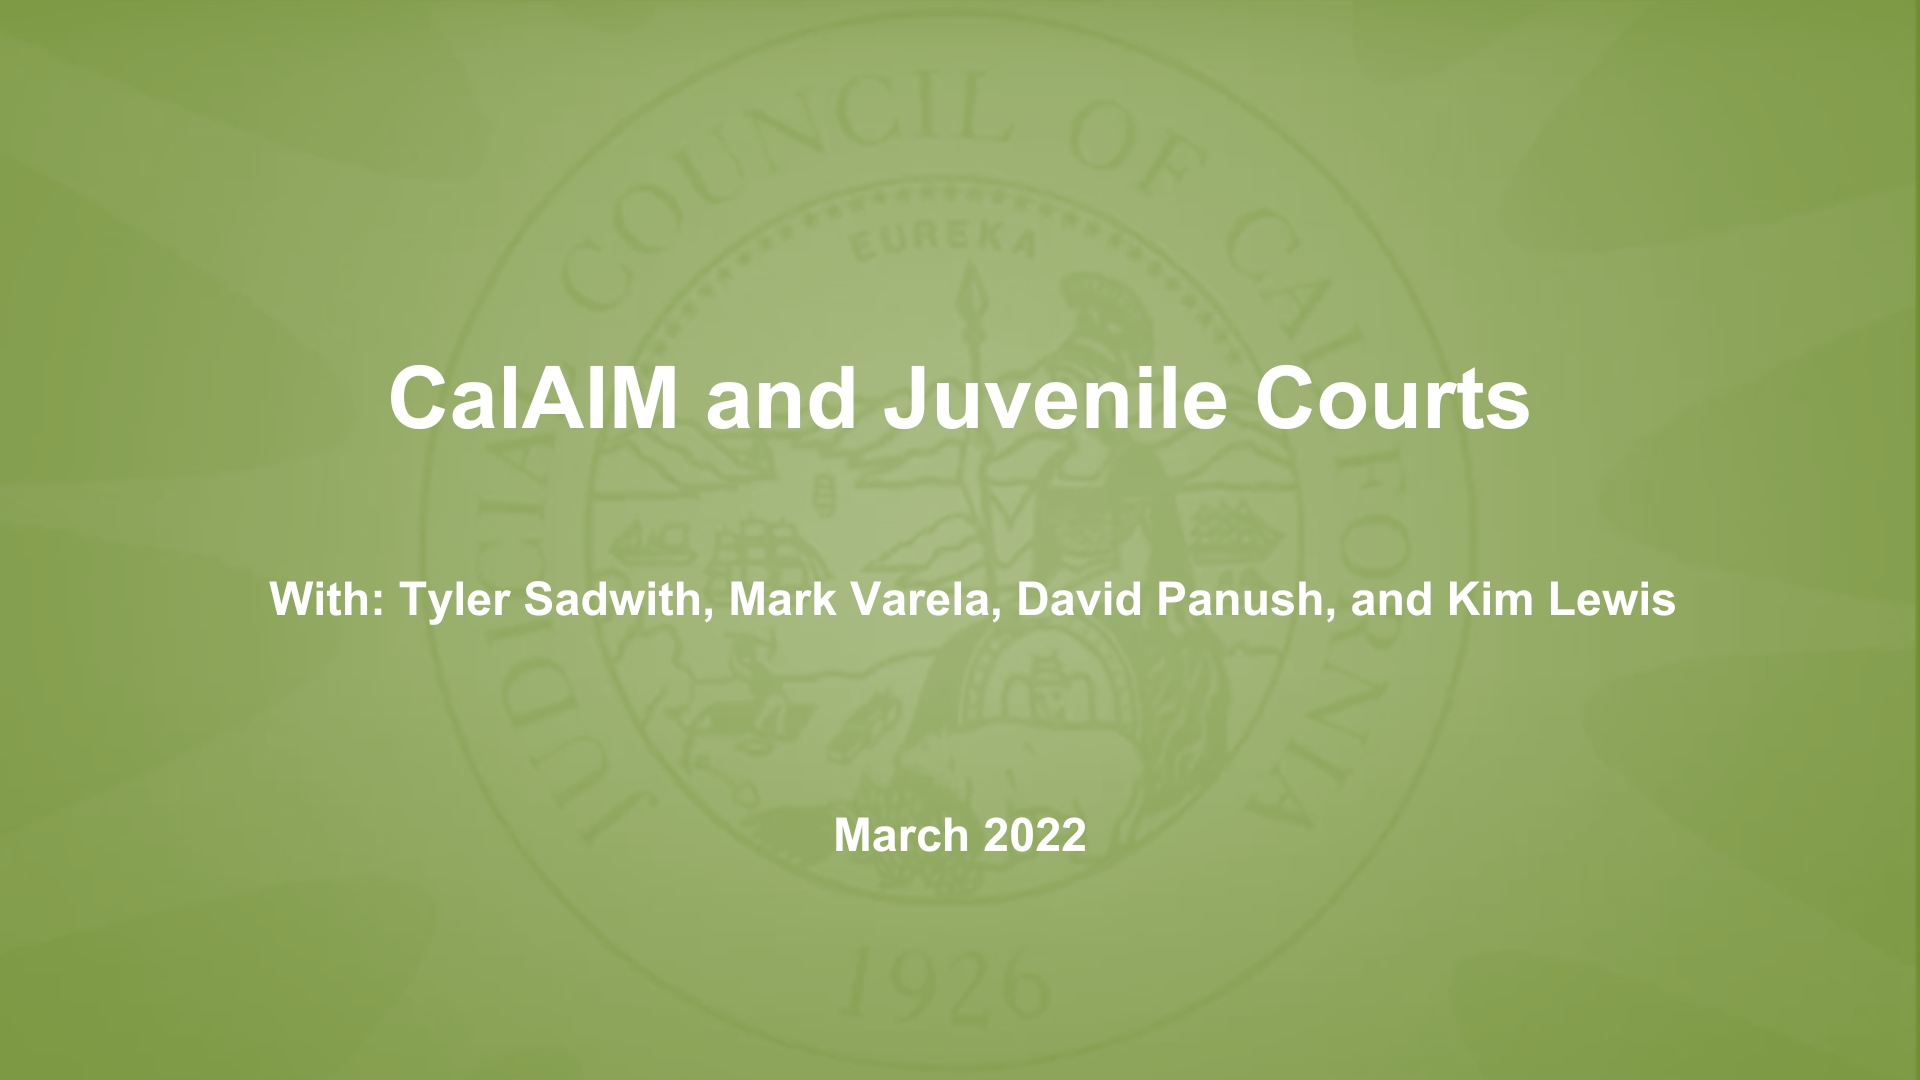 CalAIM and Juvenile Courts